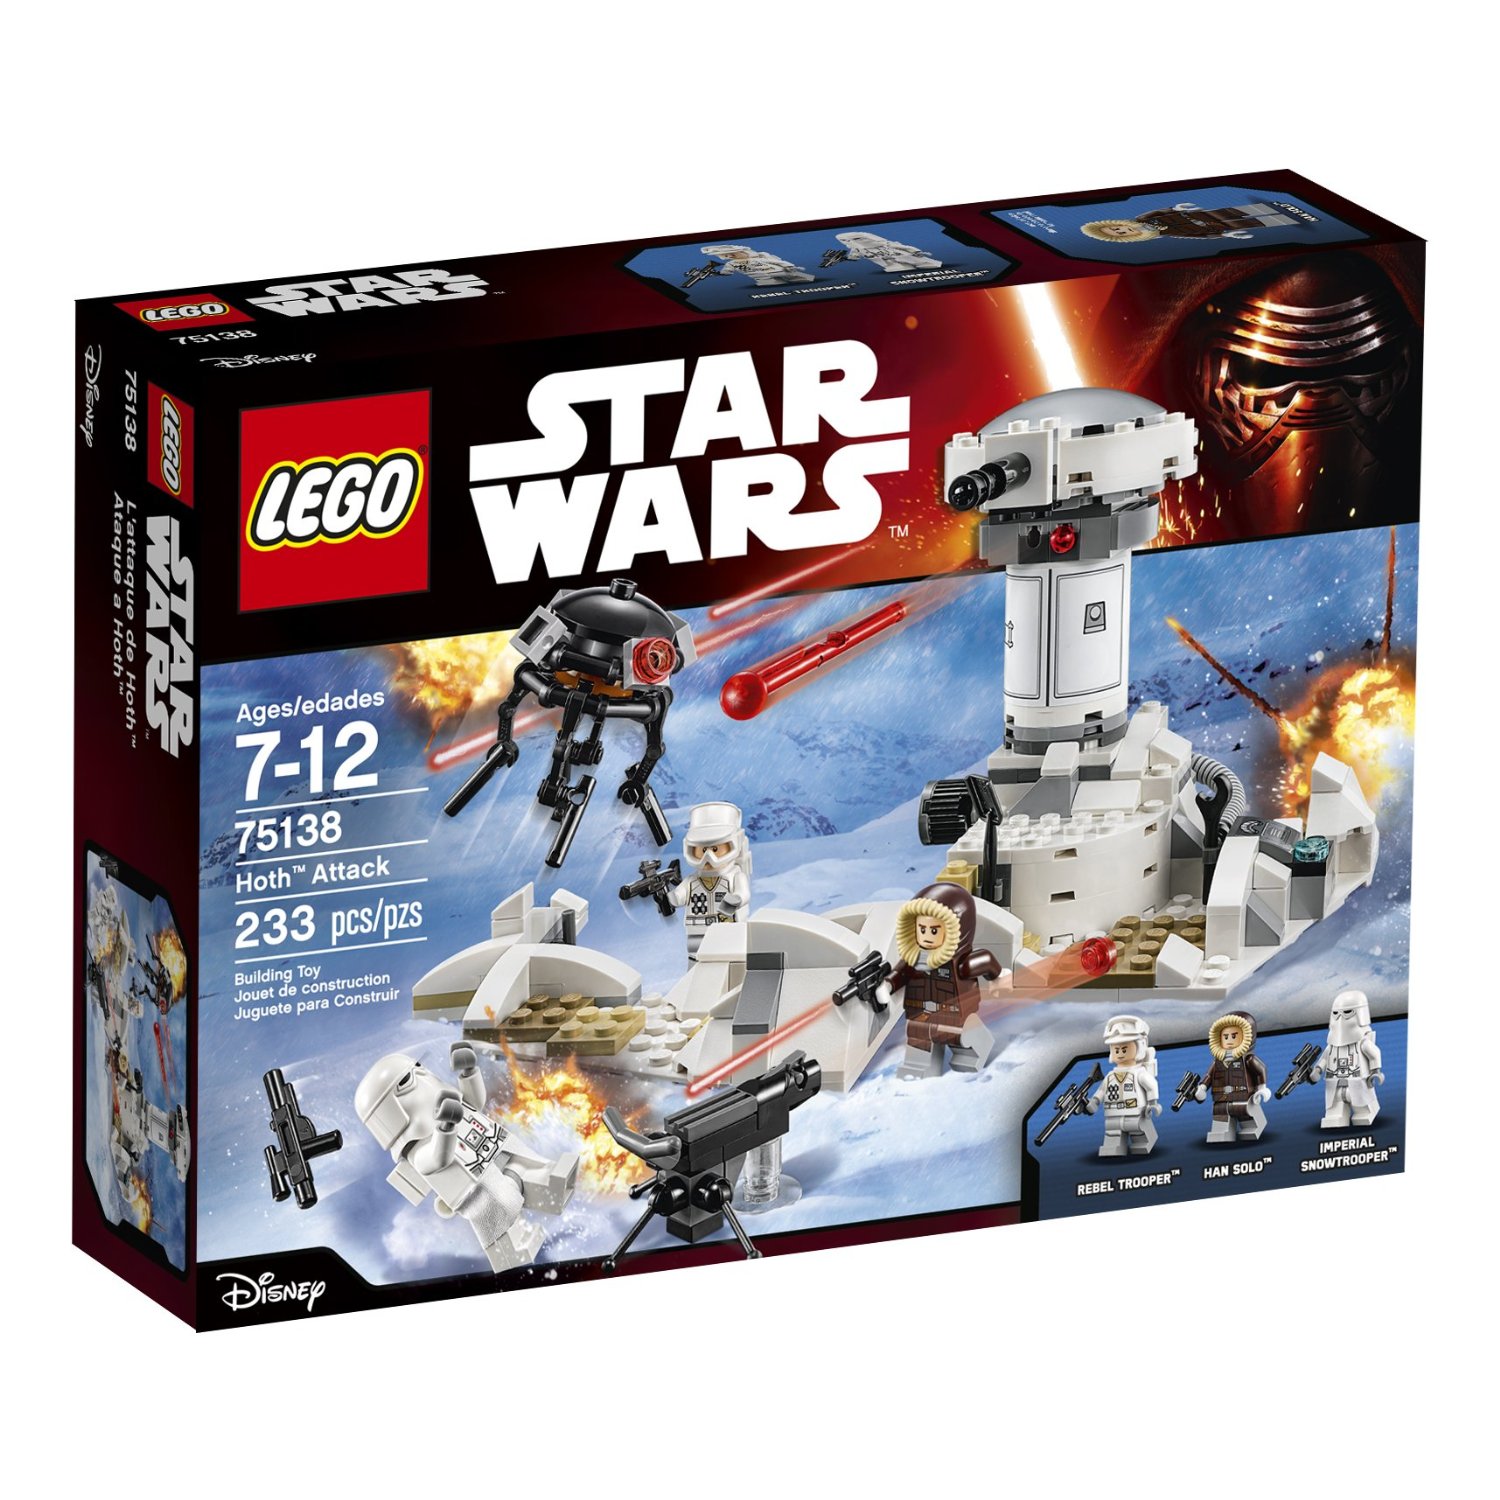 LEGO Star Wars Hoth Attack 75138 – Just $15.99!